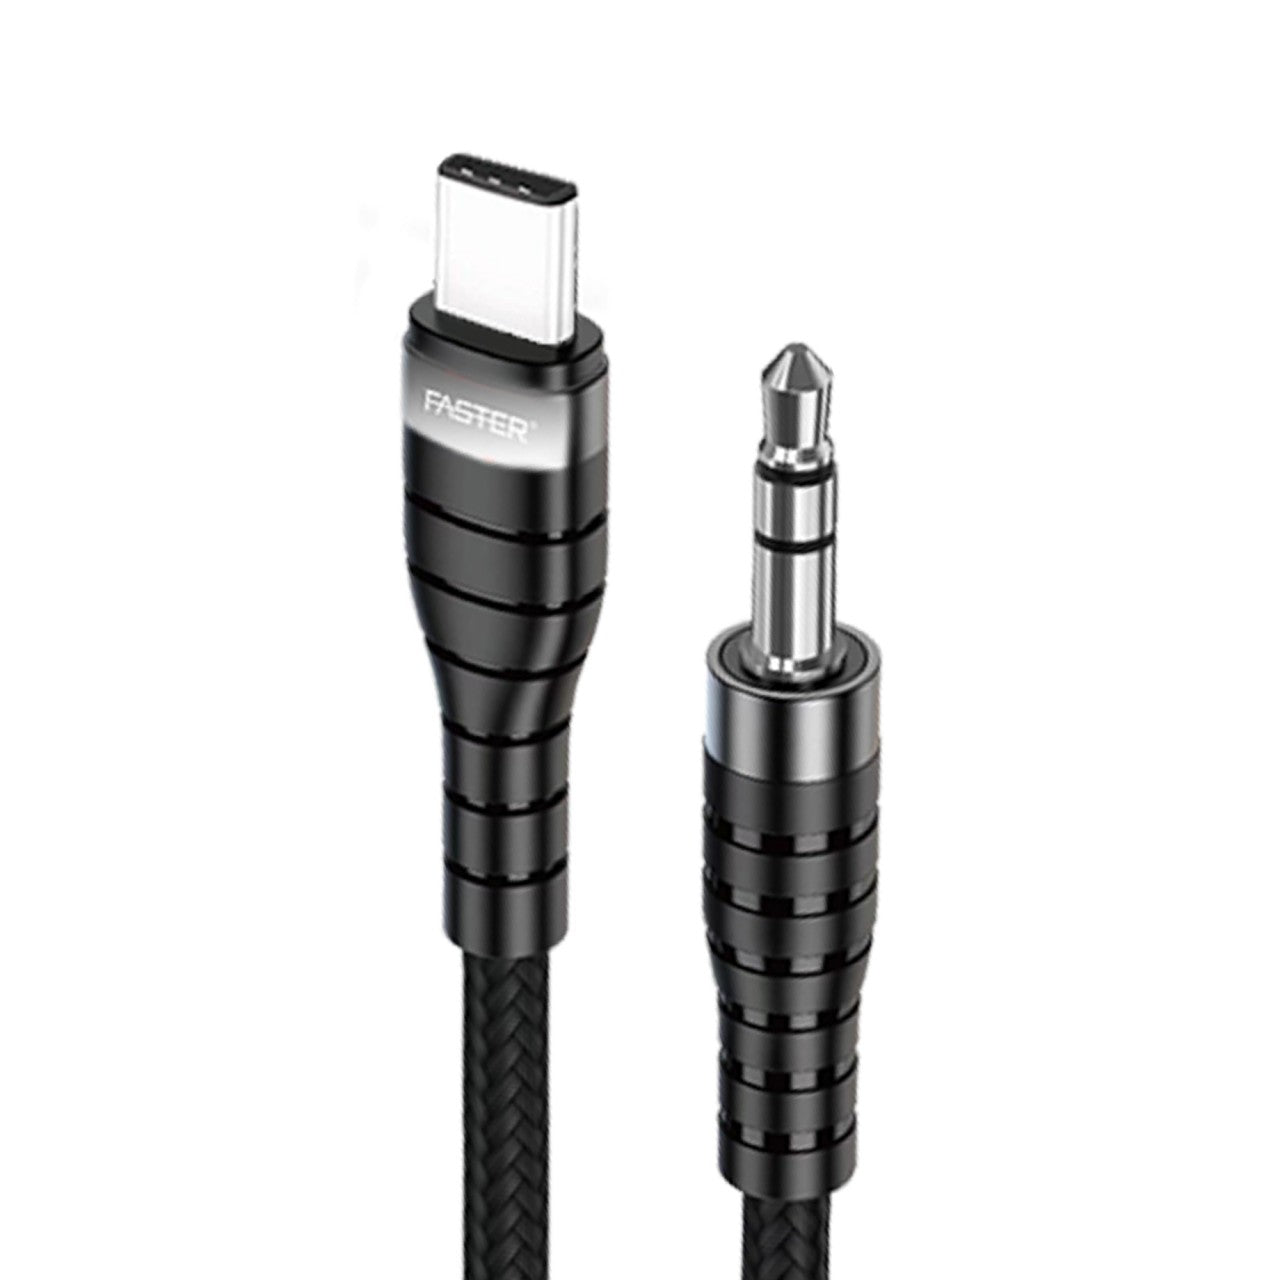 Faster M2 Audio Cable for Type-C to 3.5mm Port Price in Pakistan